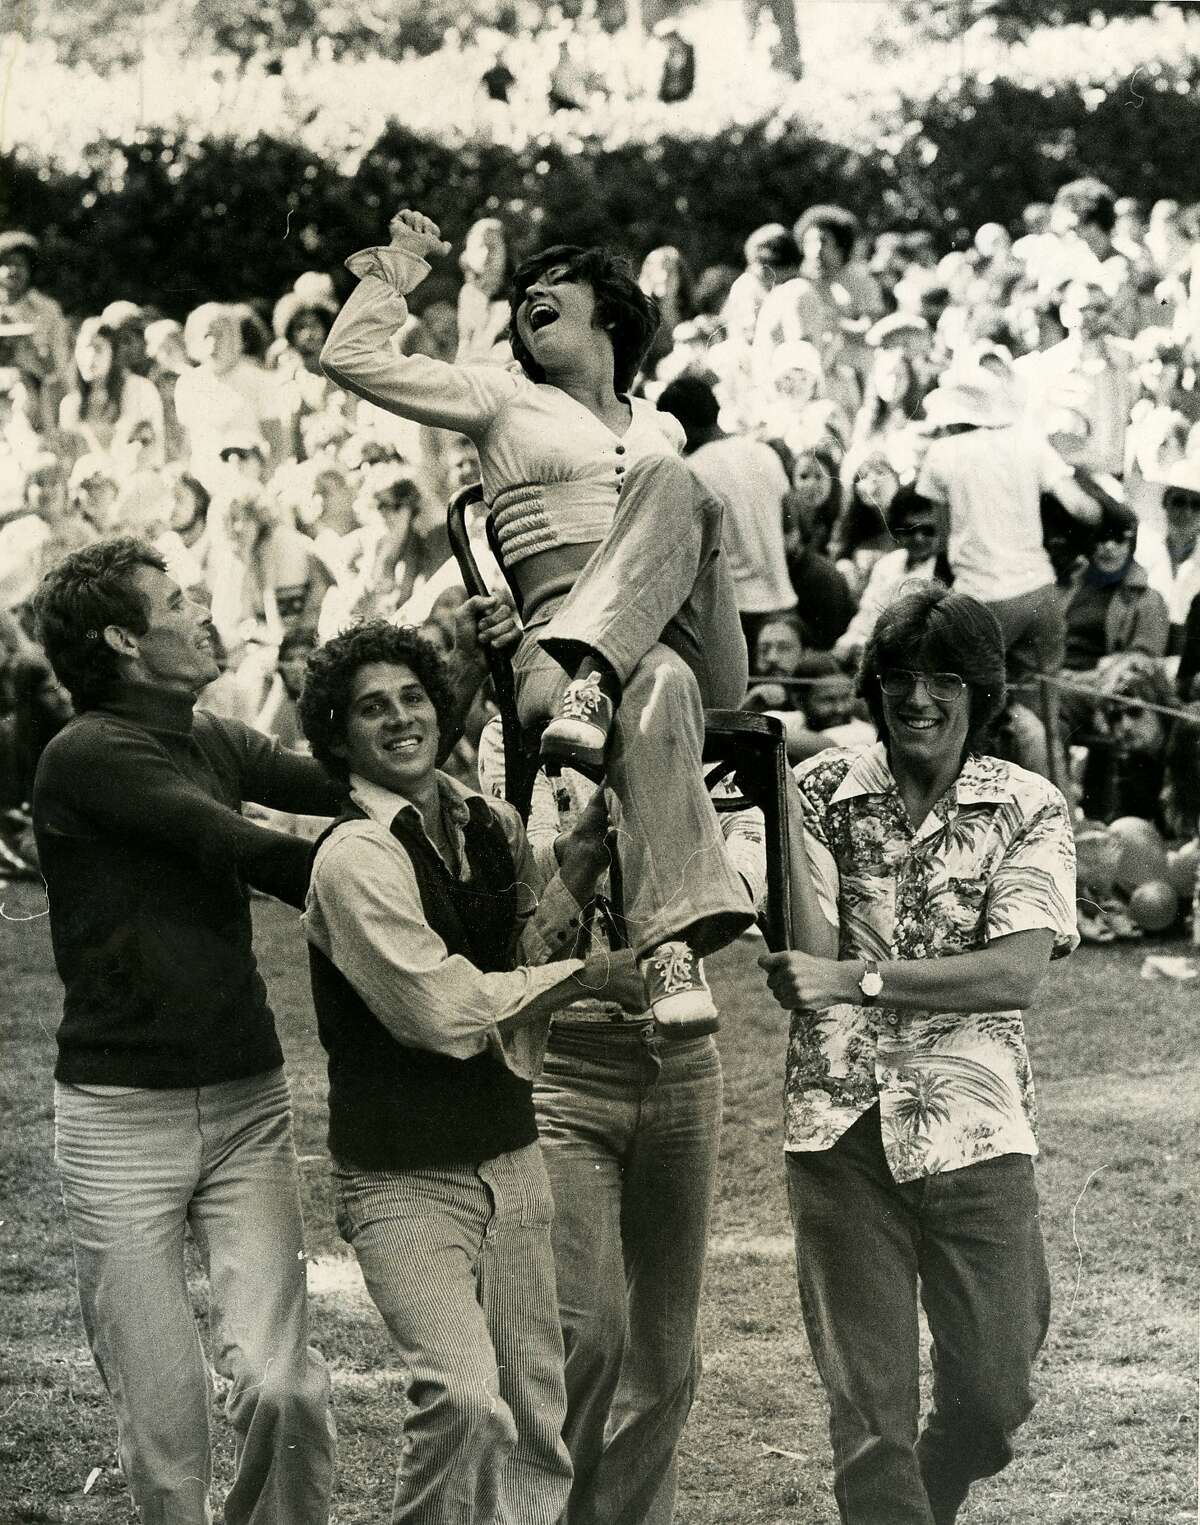 Dancers at the Don Ellis at the 37th Summer Music Festival in Stern Grove in San Francisco on August 19, 1974.